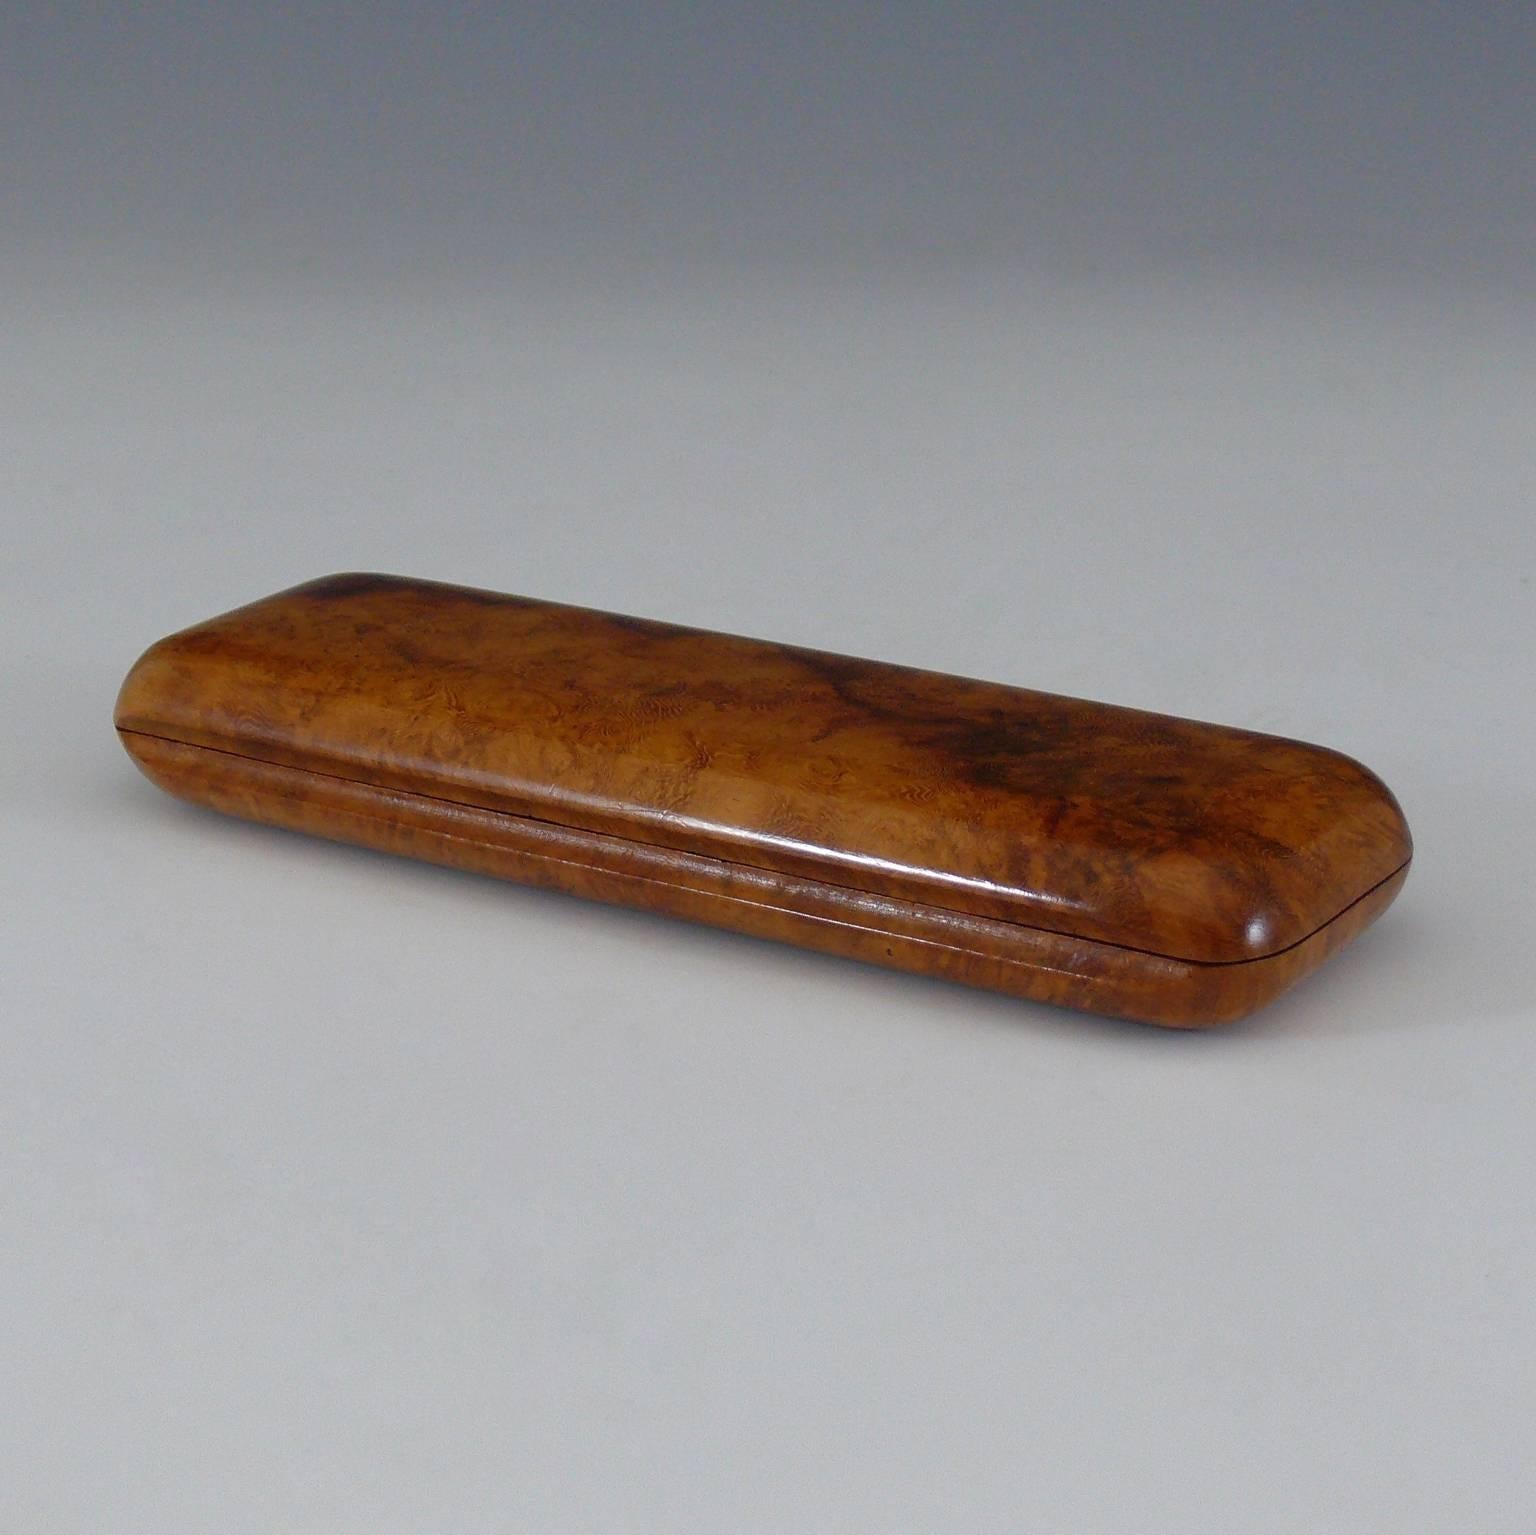 Fabulous wooden cigar case, circa 1910, made from carved Karelian birch wood. Originating from the forests north east of St Petersburg, this wood was used by Faberge amongst others, who chose it for its beautiful figuring. Karelian Birch is not a